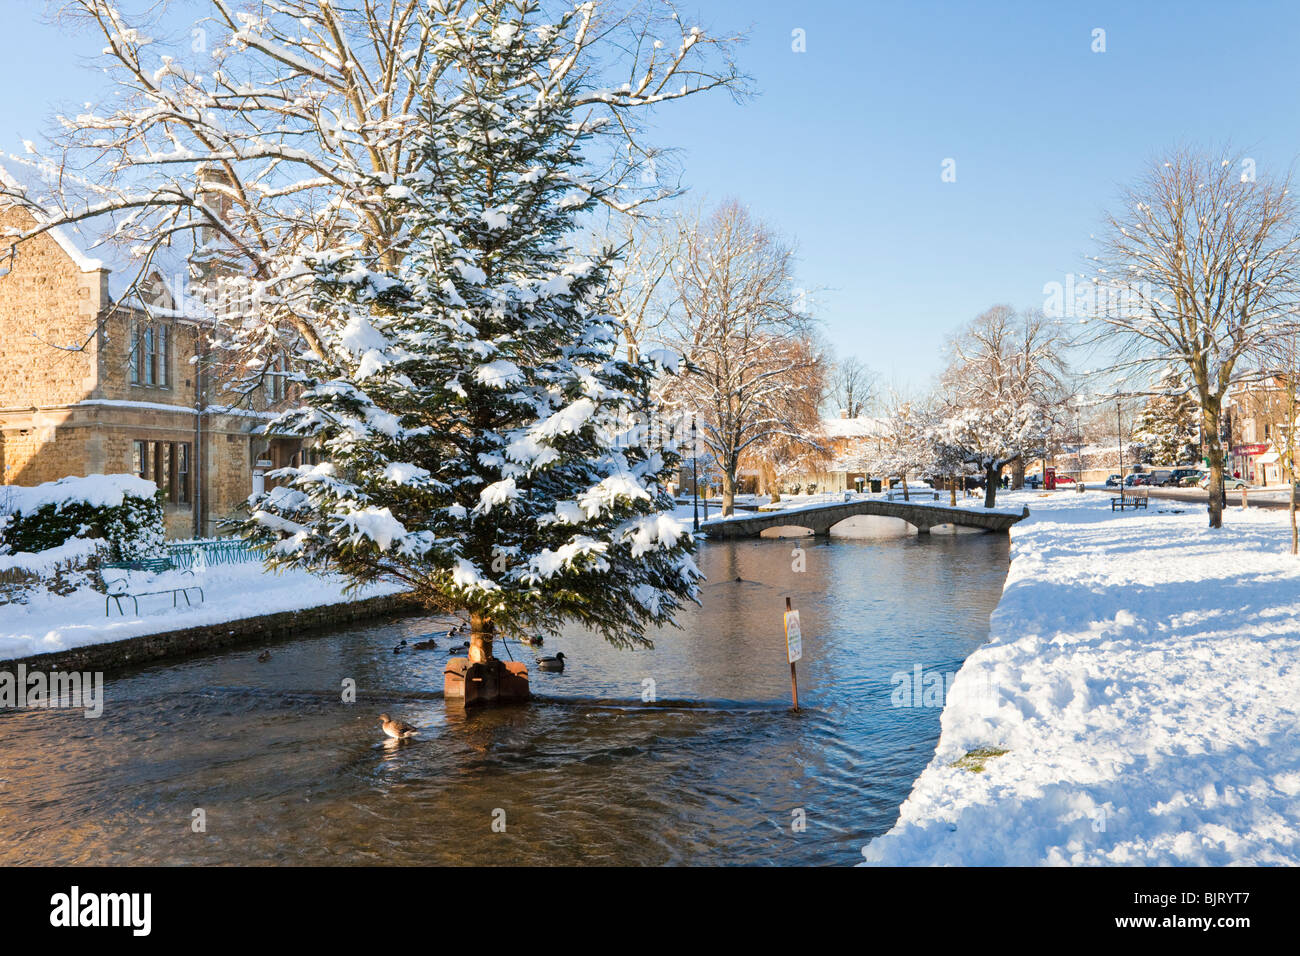 Winter snow on the Christmas tree in the River Windrush in the Cotswold village of Bourton on the Water, Gloucestershire UK Stock Photo